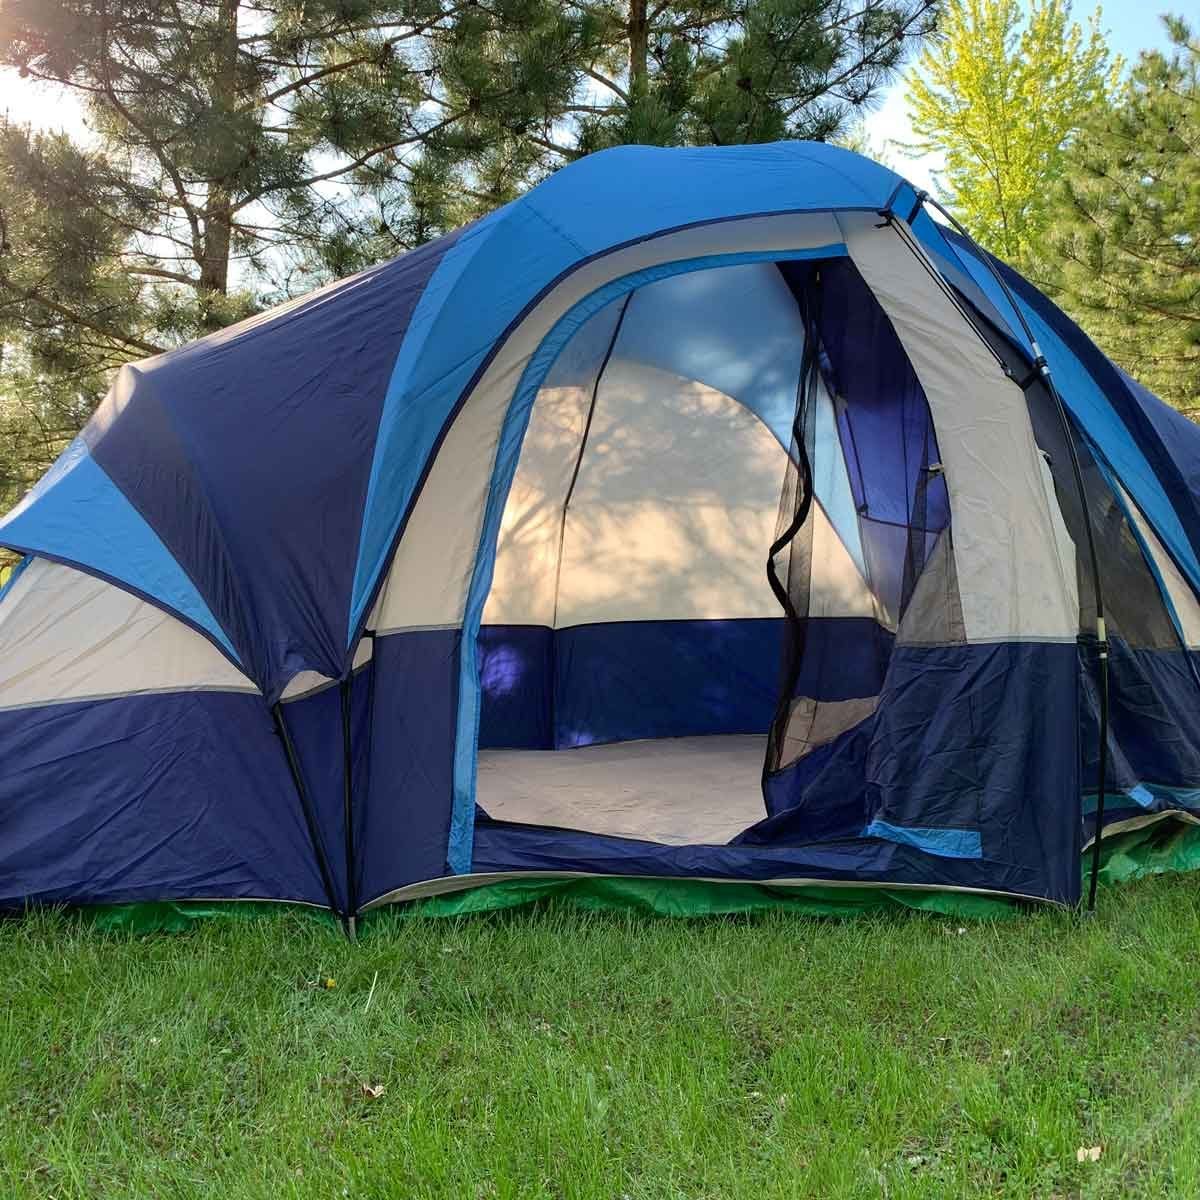 How to Set Up a Tent Correctly